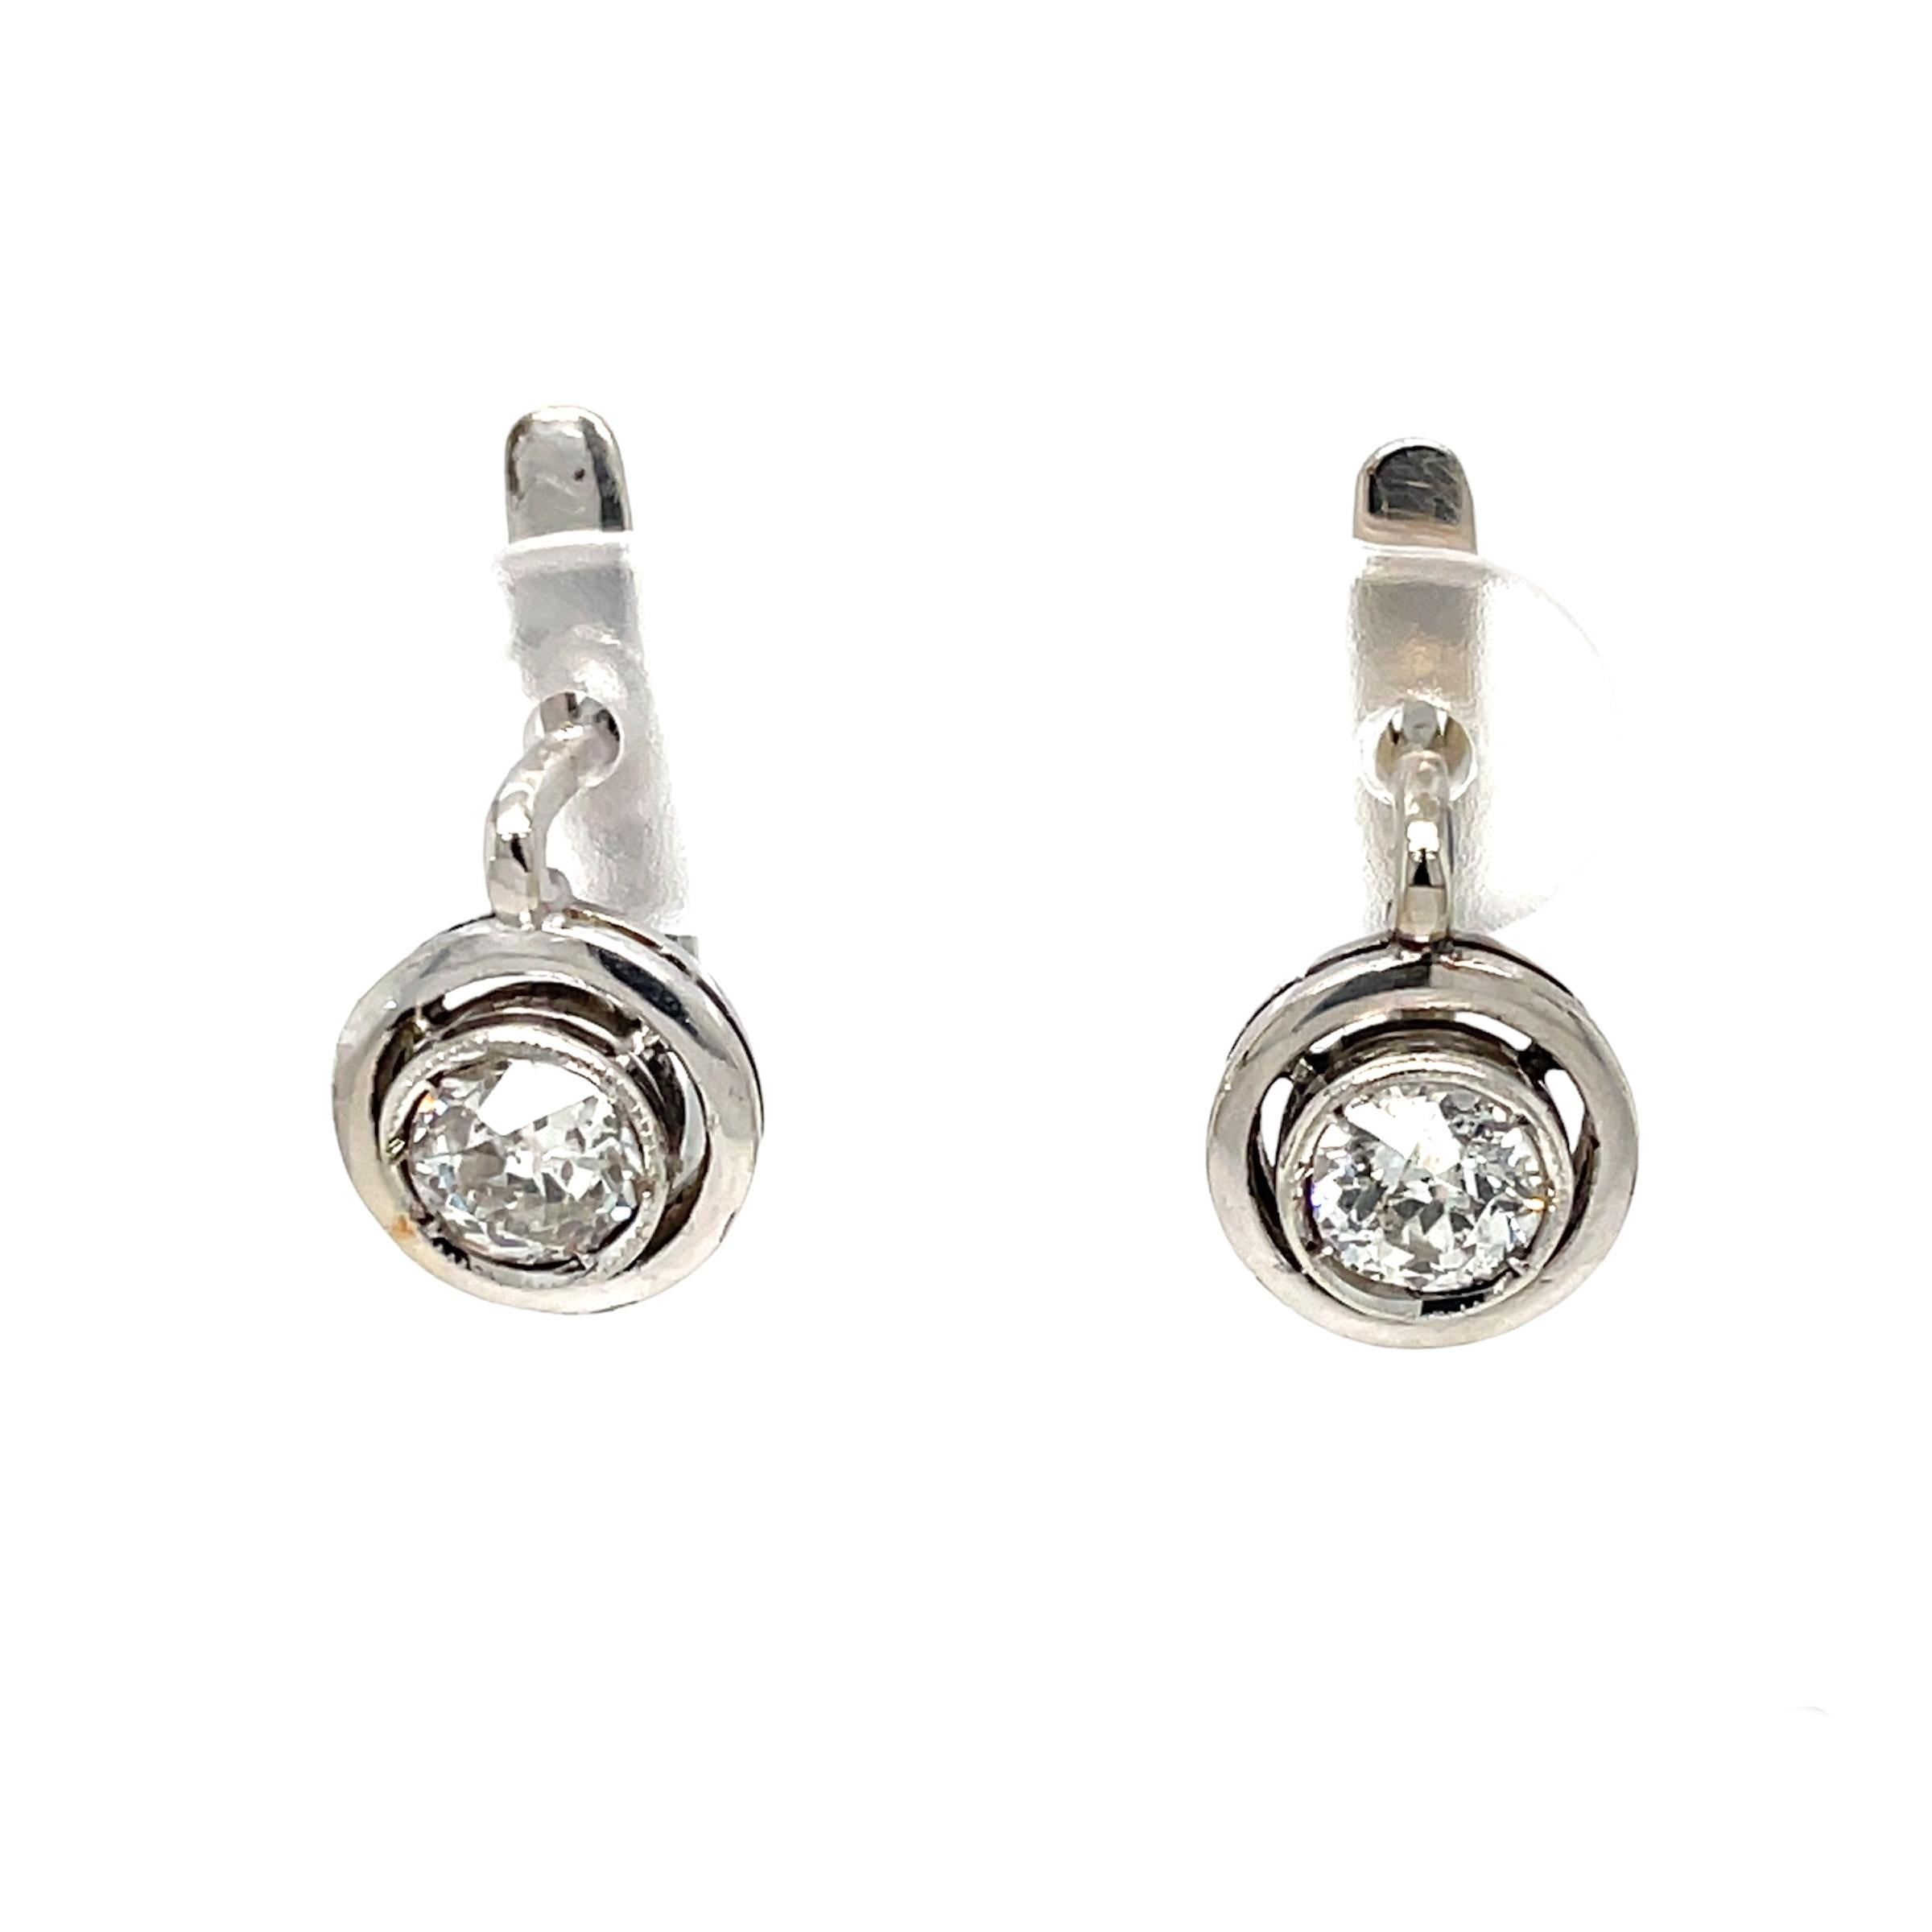 One pair of Timeless old mine cut Diamonds clip-on earrings weighing 1,20 carats and graded G/H color SI clarity all together.
They are mounted in 18k white gold 

CONDITION: Pre-owned - Excellent
METAL: 18k White Gold
GEM STONE: Diamond 1,20 total